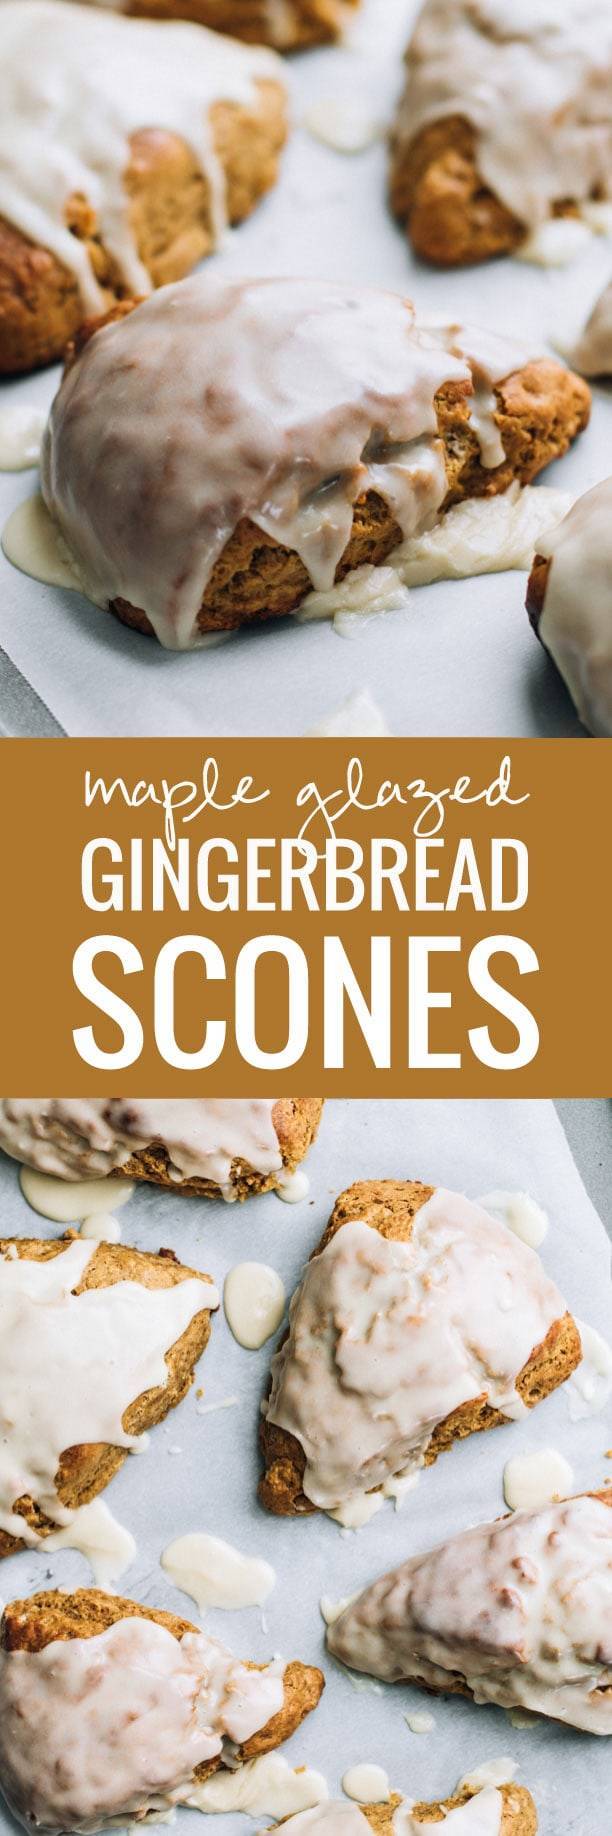 Maple Glazed Gingerbread Scones - the most cozy winter breakfast treat, especially perfect with a mug of hot coffee!